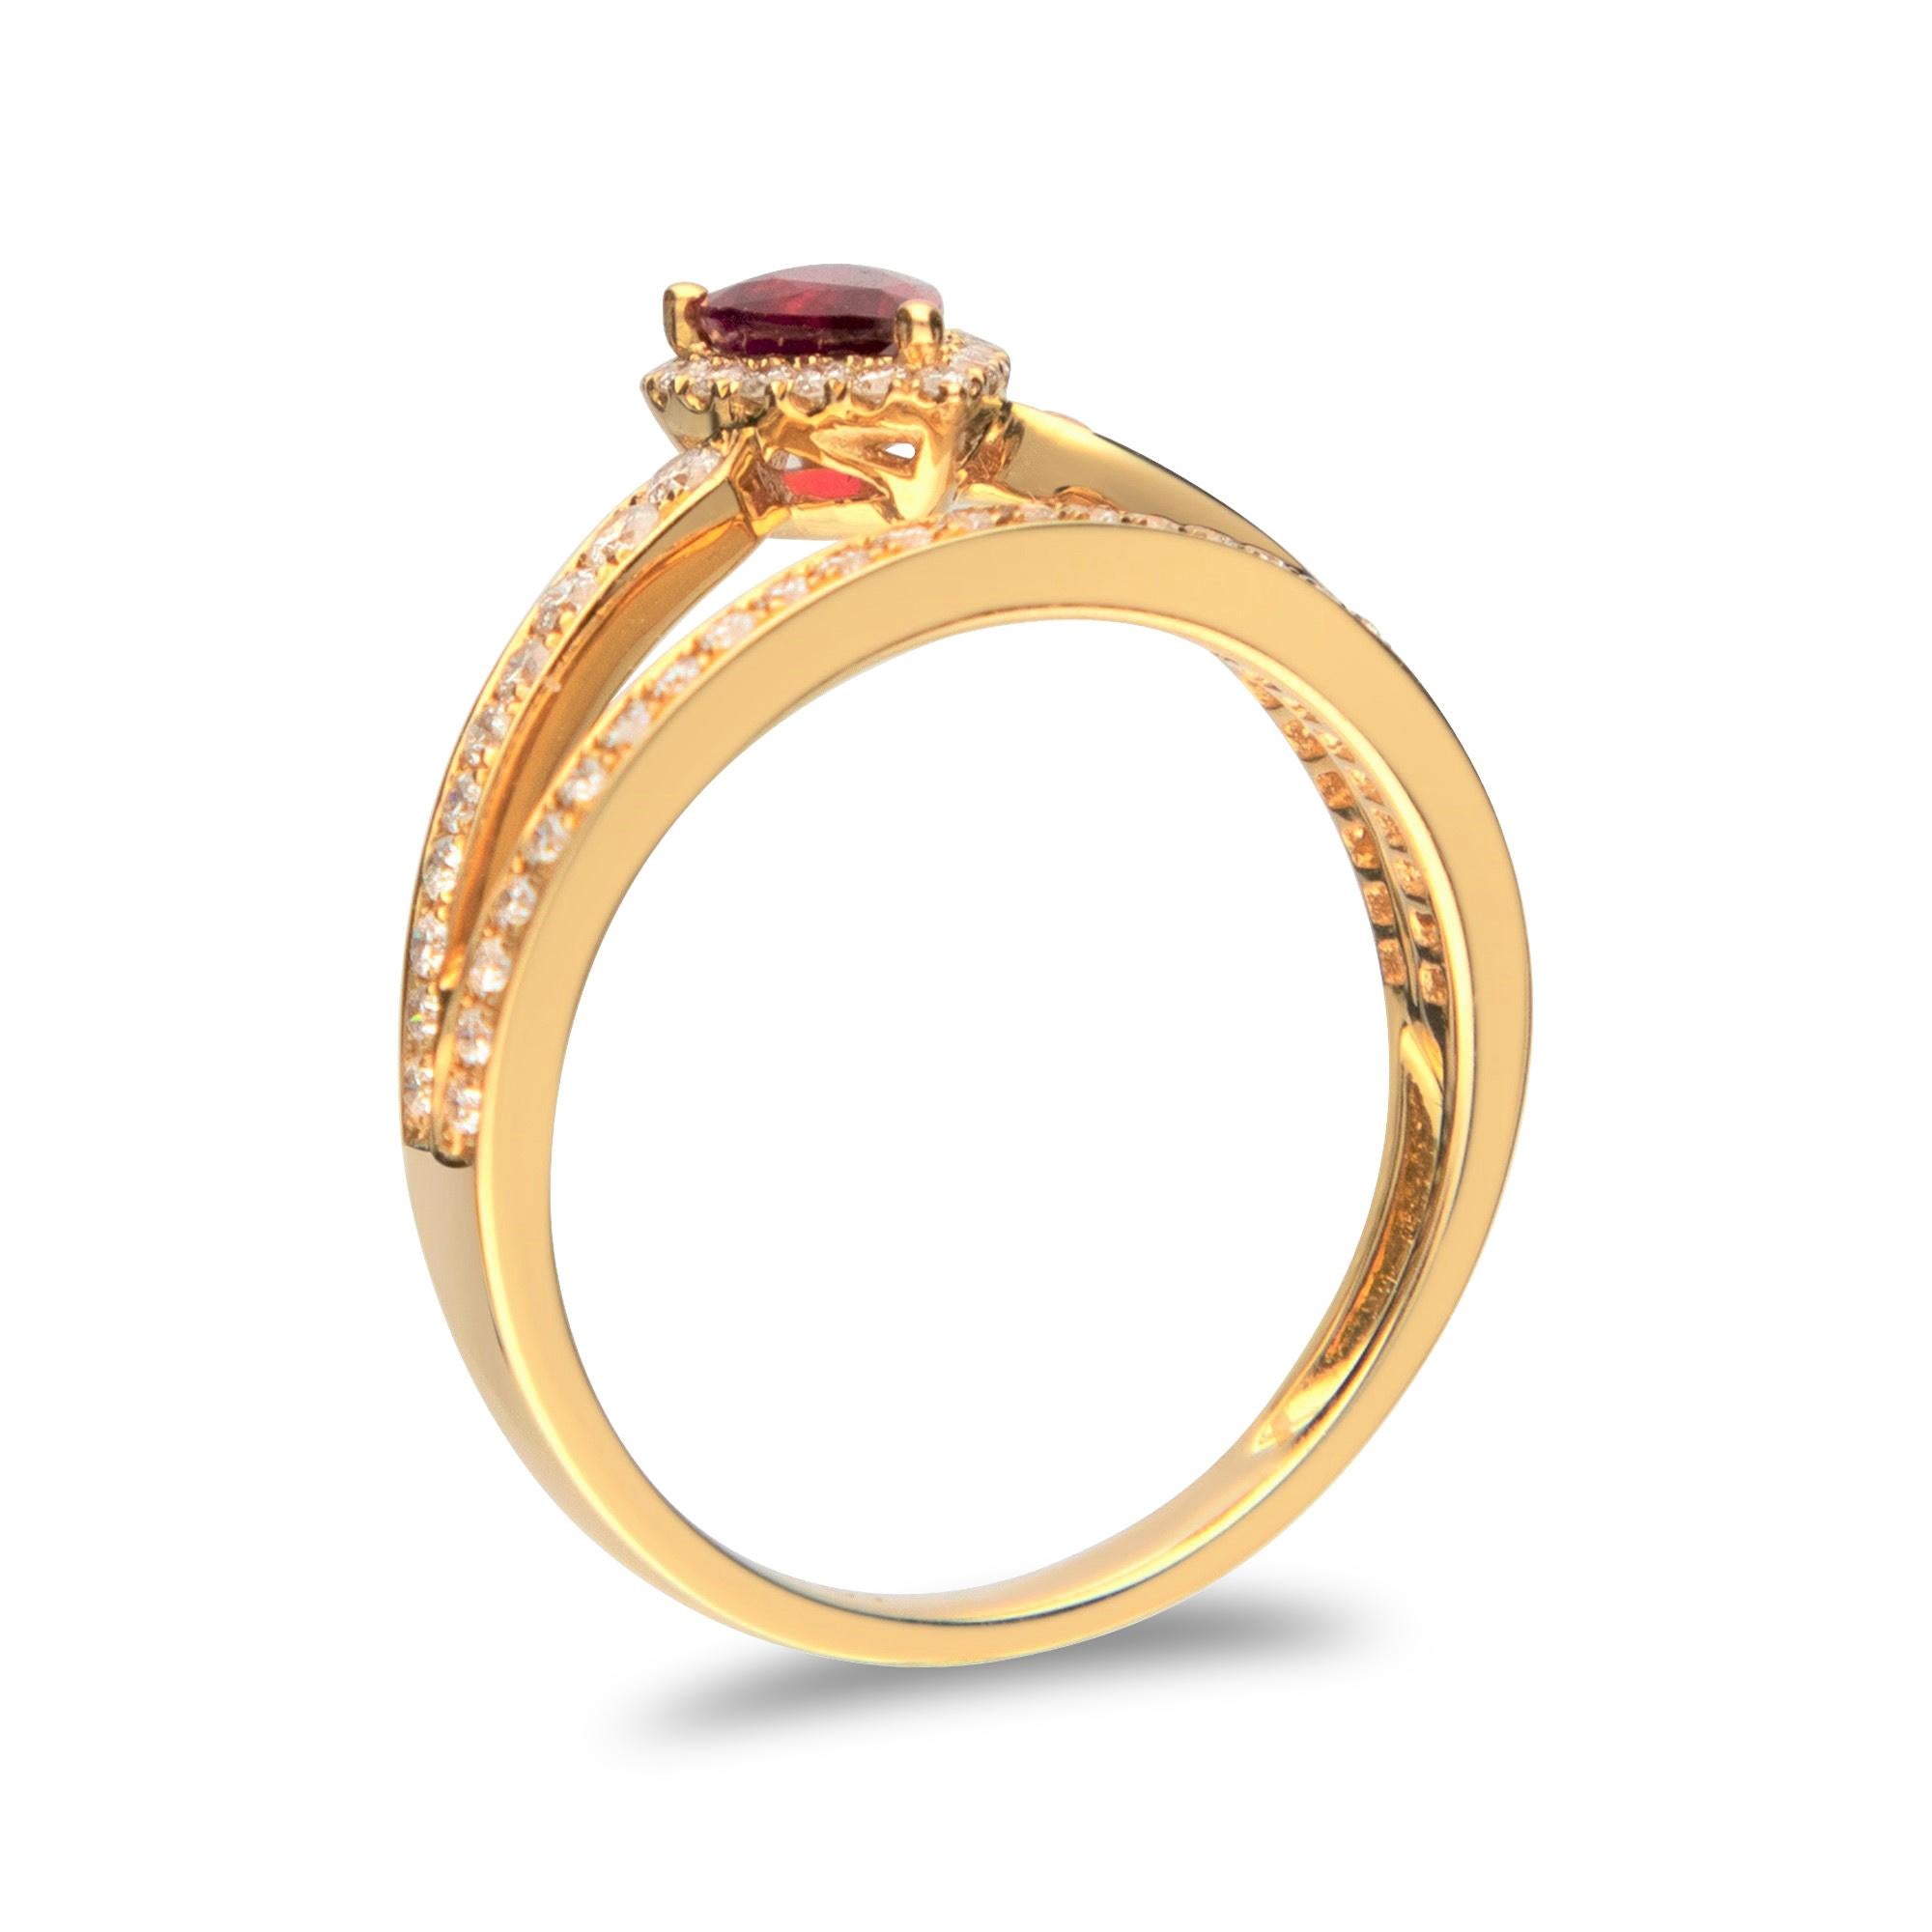 This beautiful Genuine Ruby Ring is crafted in 14-karat Yellow gold and features a 0.45 carat 1 Pc Genuine Ruby and 63 Pcs Round White Diamonds in GH- I1 quality with 0.39 Ct in a prong-setting. This Ring comes in sizes 6 to 9, and it is a perfect